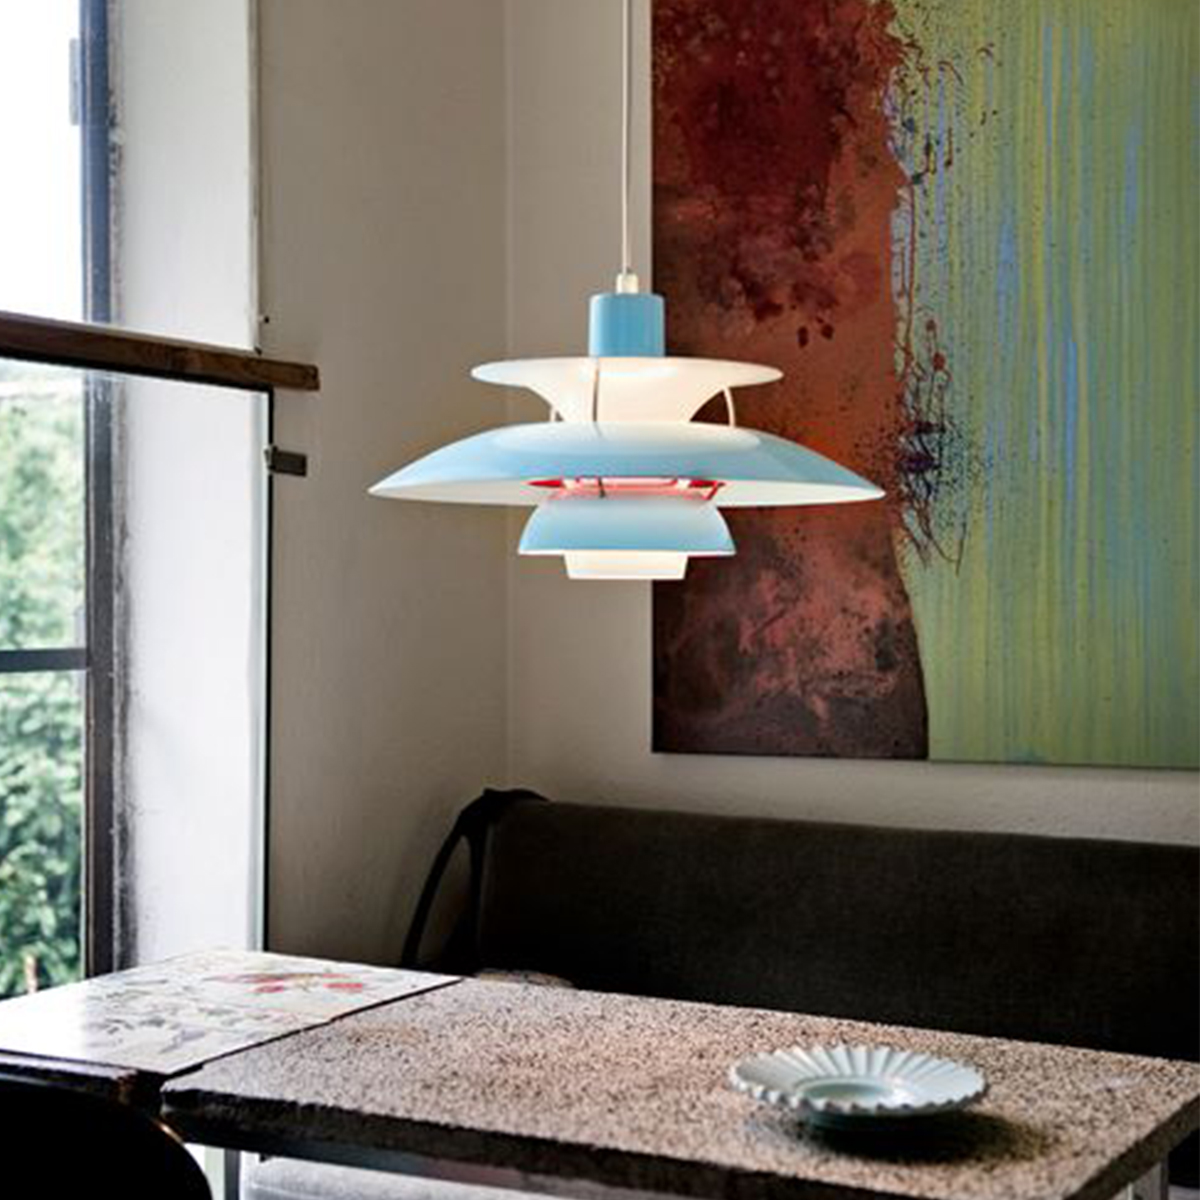 Hues Of Blue PH 5 Pendant (LED, Non-Dimmable) by Poulsen